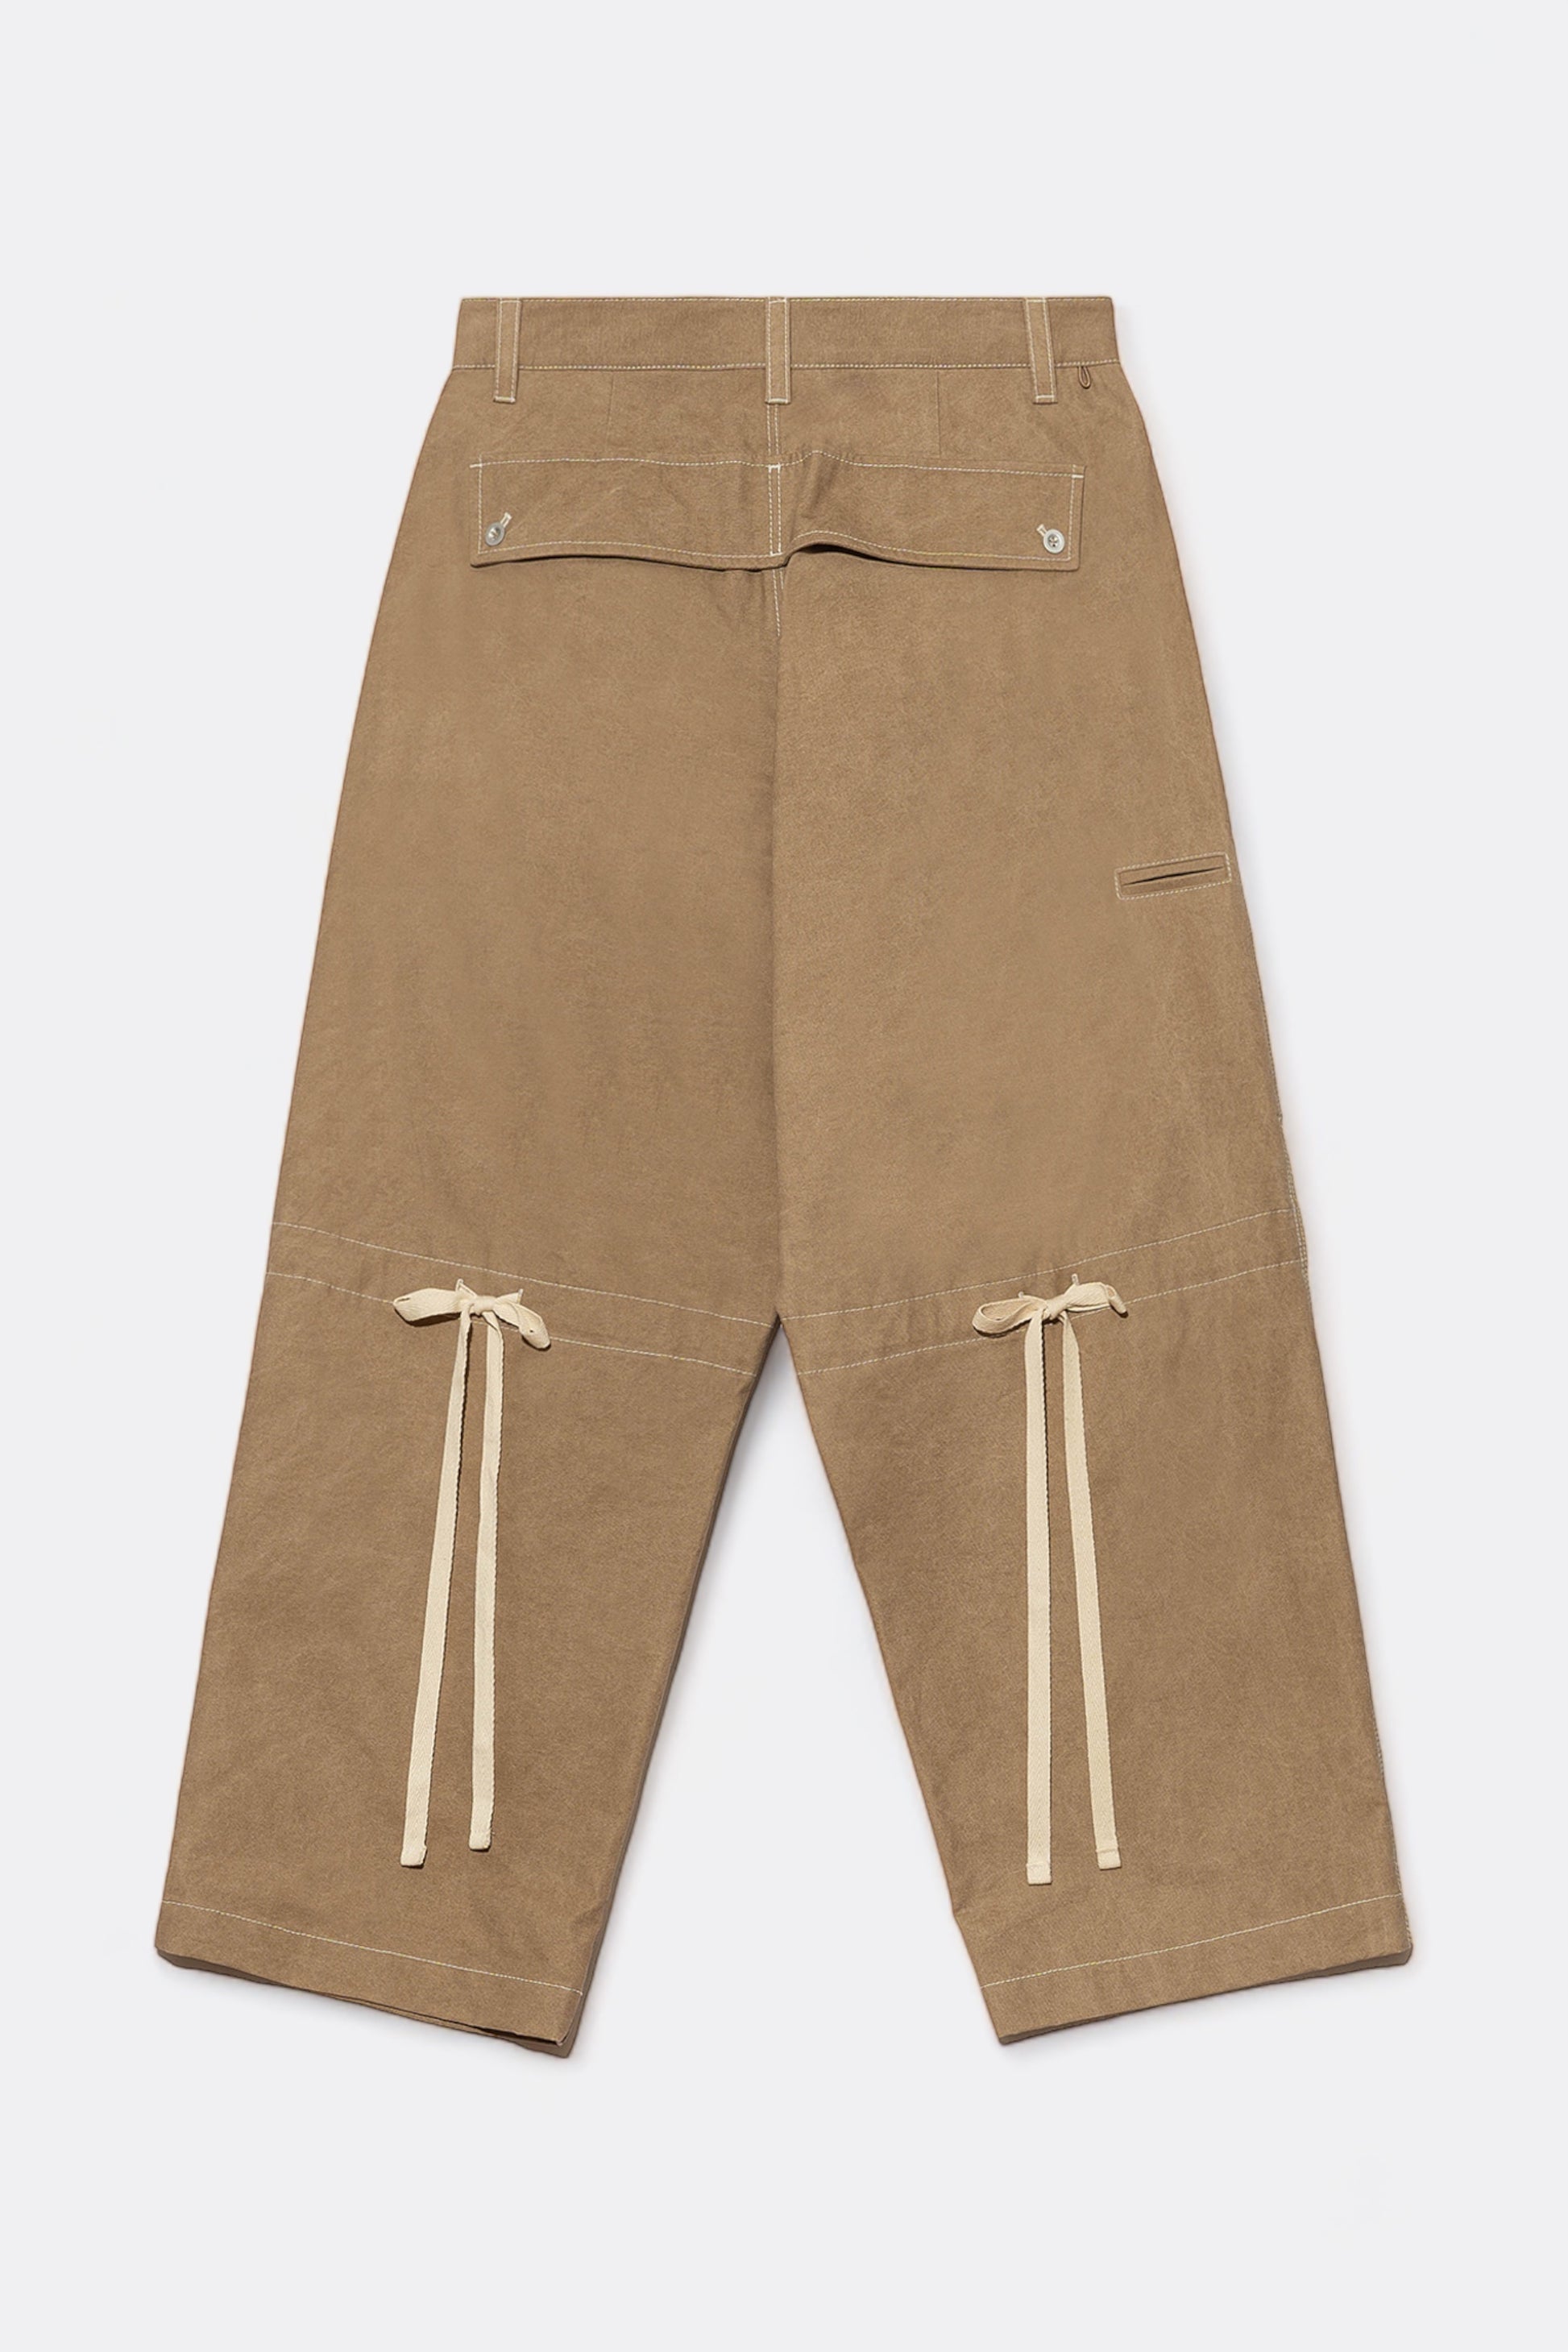 Merely Made - Merely Hmong Workers Pants (Light Tan)